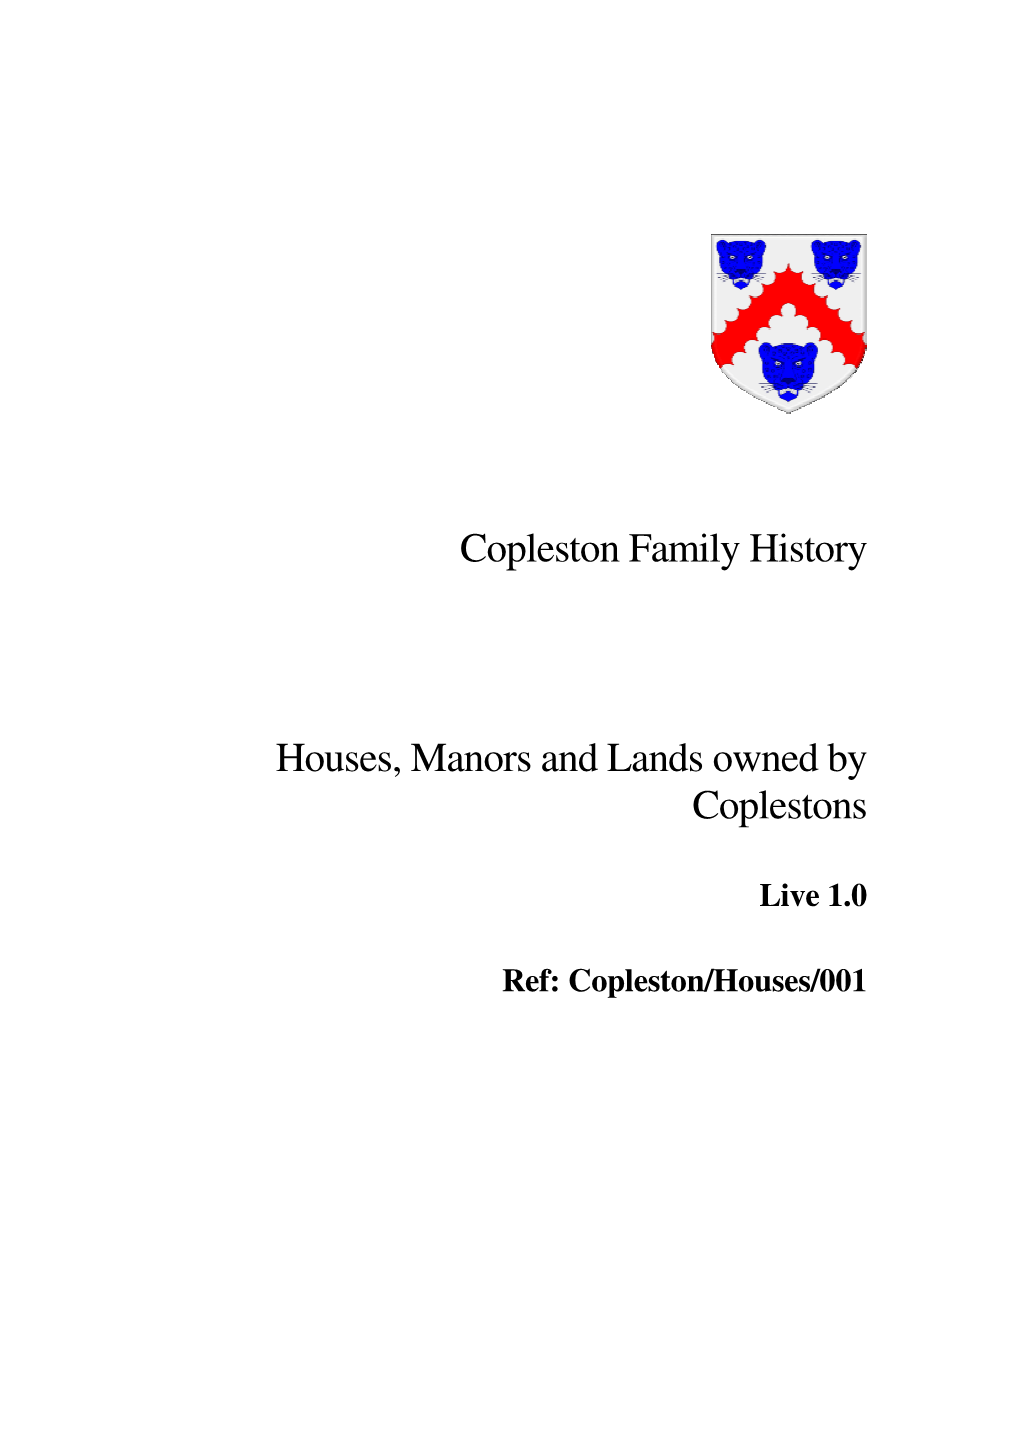 Copleston Family History Houses, Manors and Lands Owned By